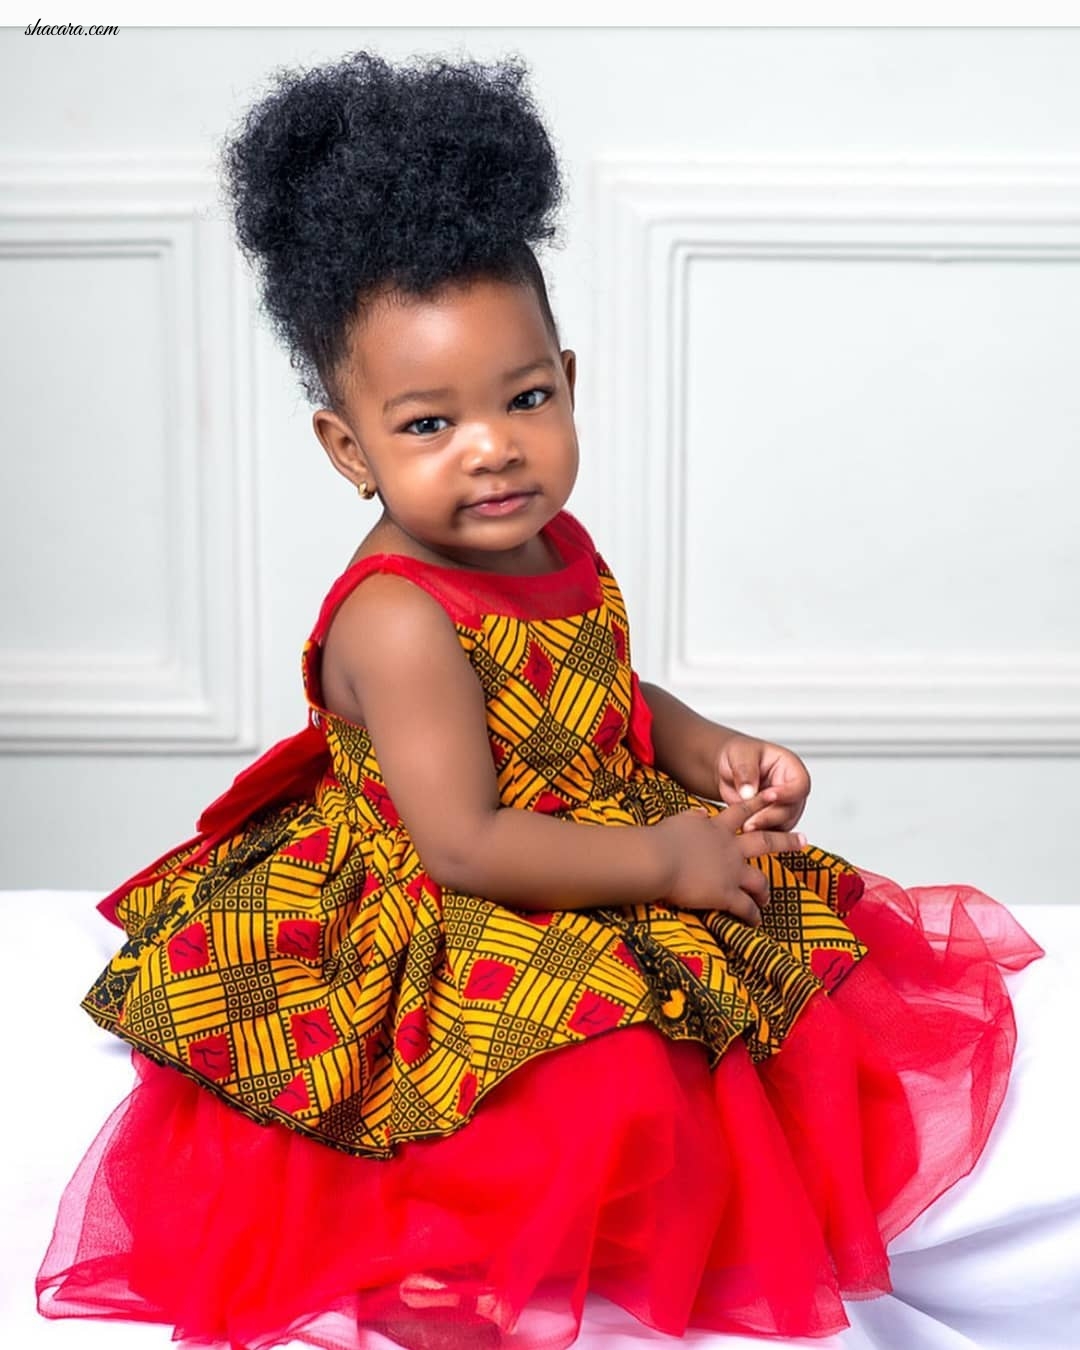 PICS: This Instant Viral Cute Baby Just Made Our Sunday In Fab African Fashion, Her Pics Will Melt Your Heart